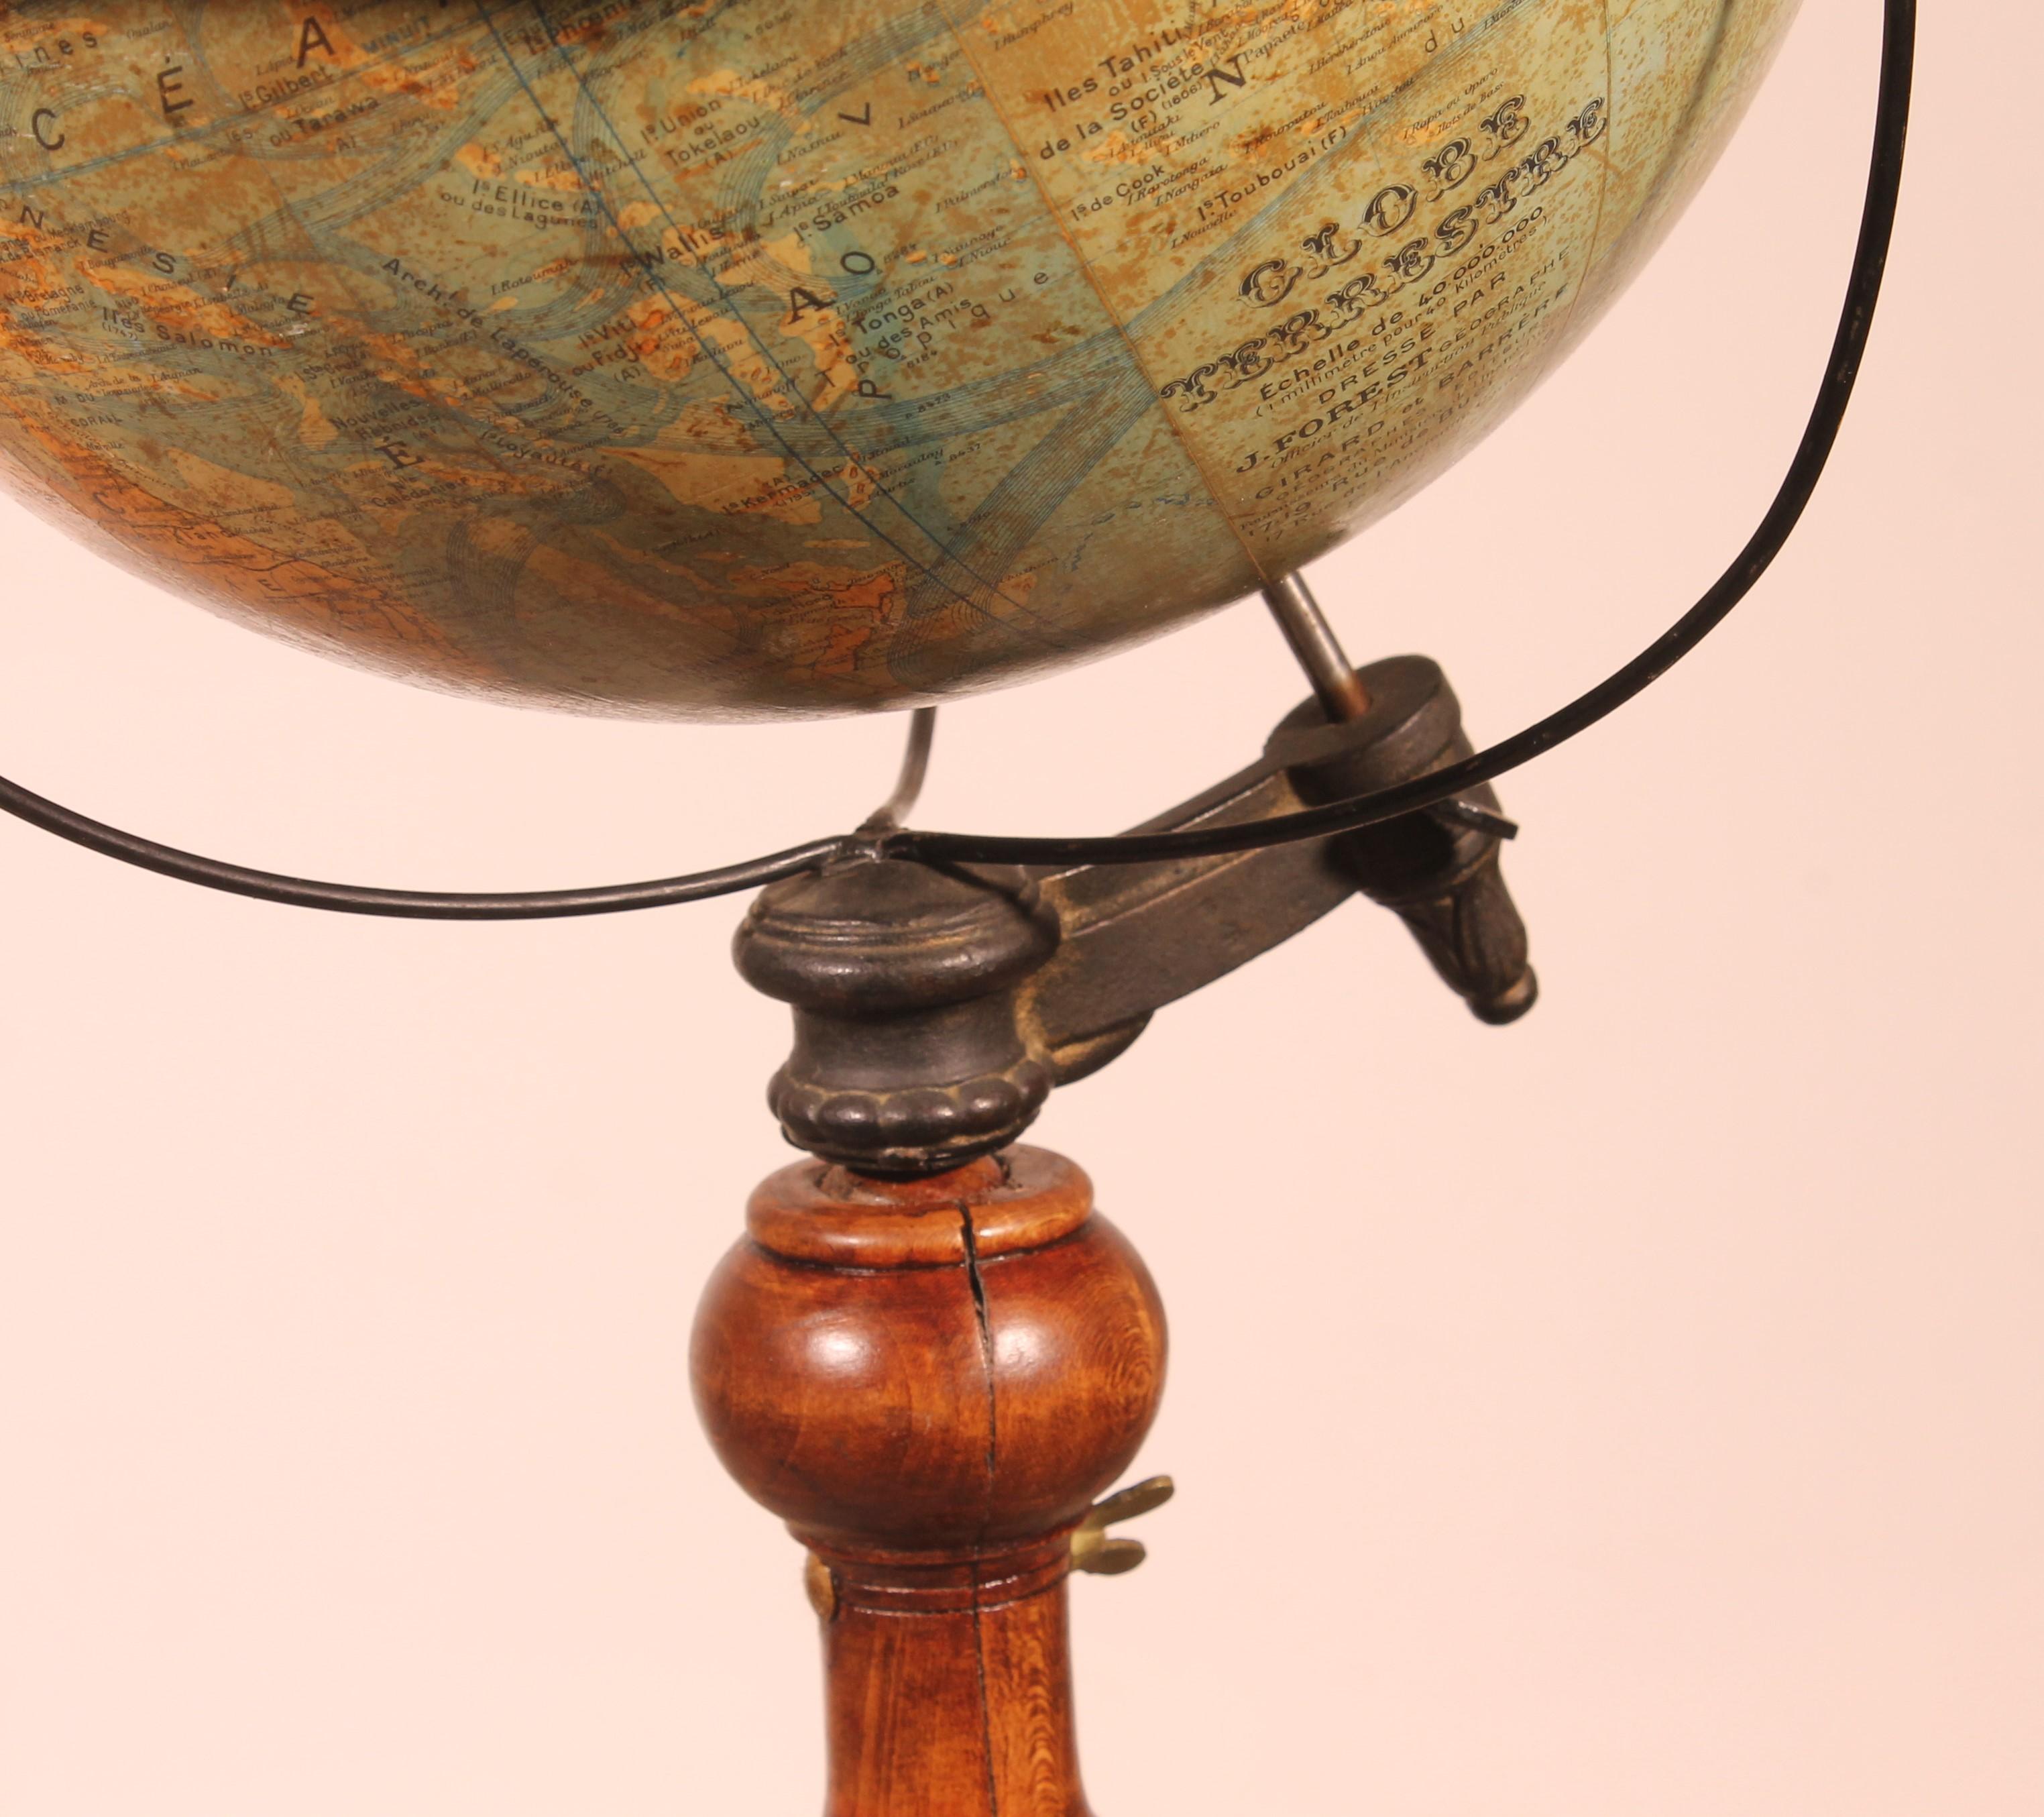 Very beautiful library globe made by J.Forest Paris rue de Buci from the 19th century

globes on stands are the rarest. This one made by J. Forest, a famous publishing house in Paris in the 19th century, has a very beautiful turned base.

The Globe